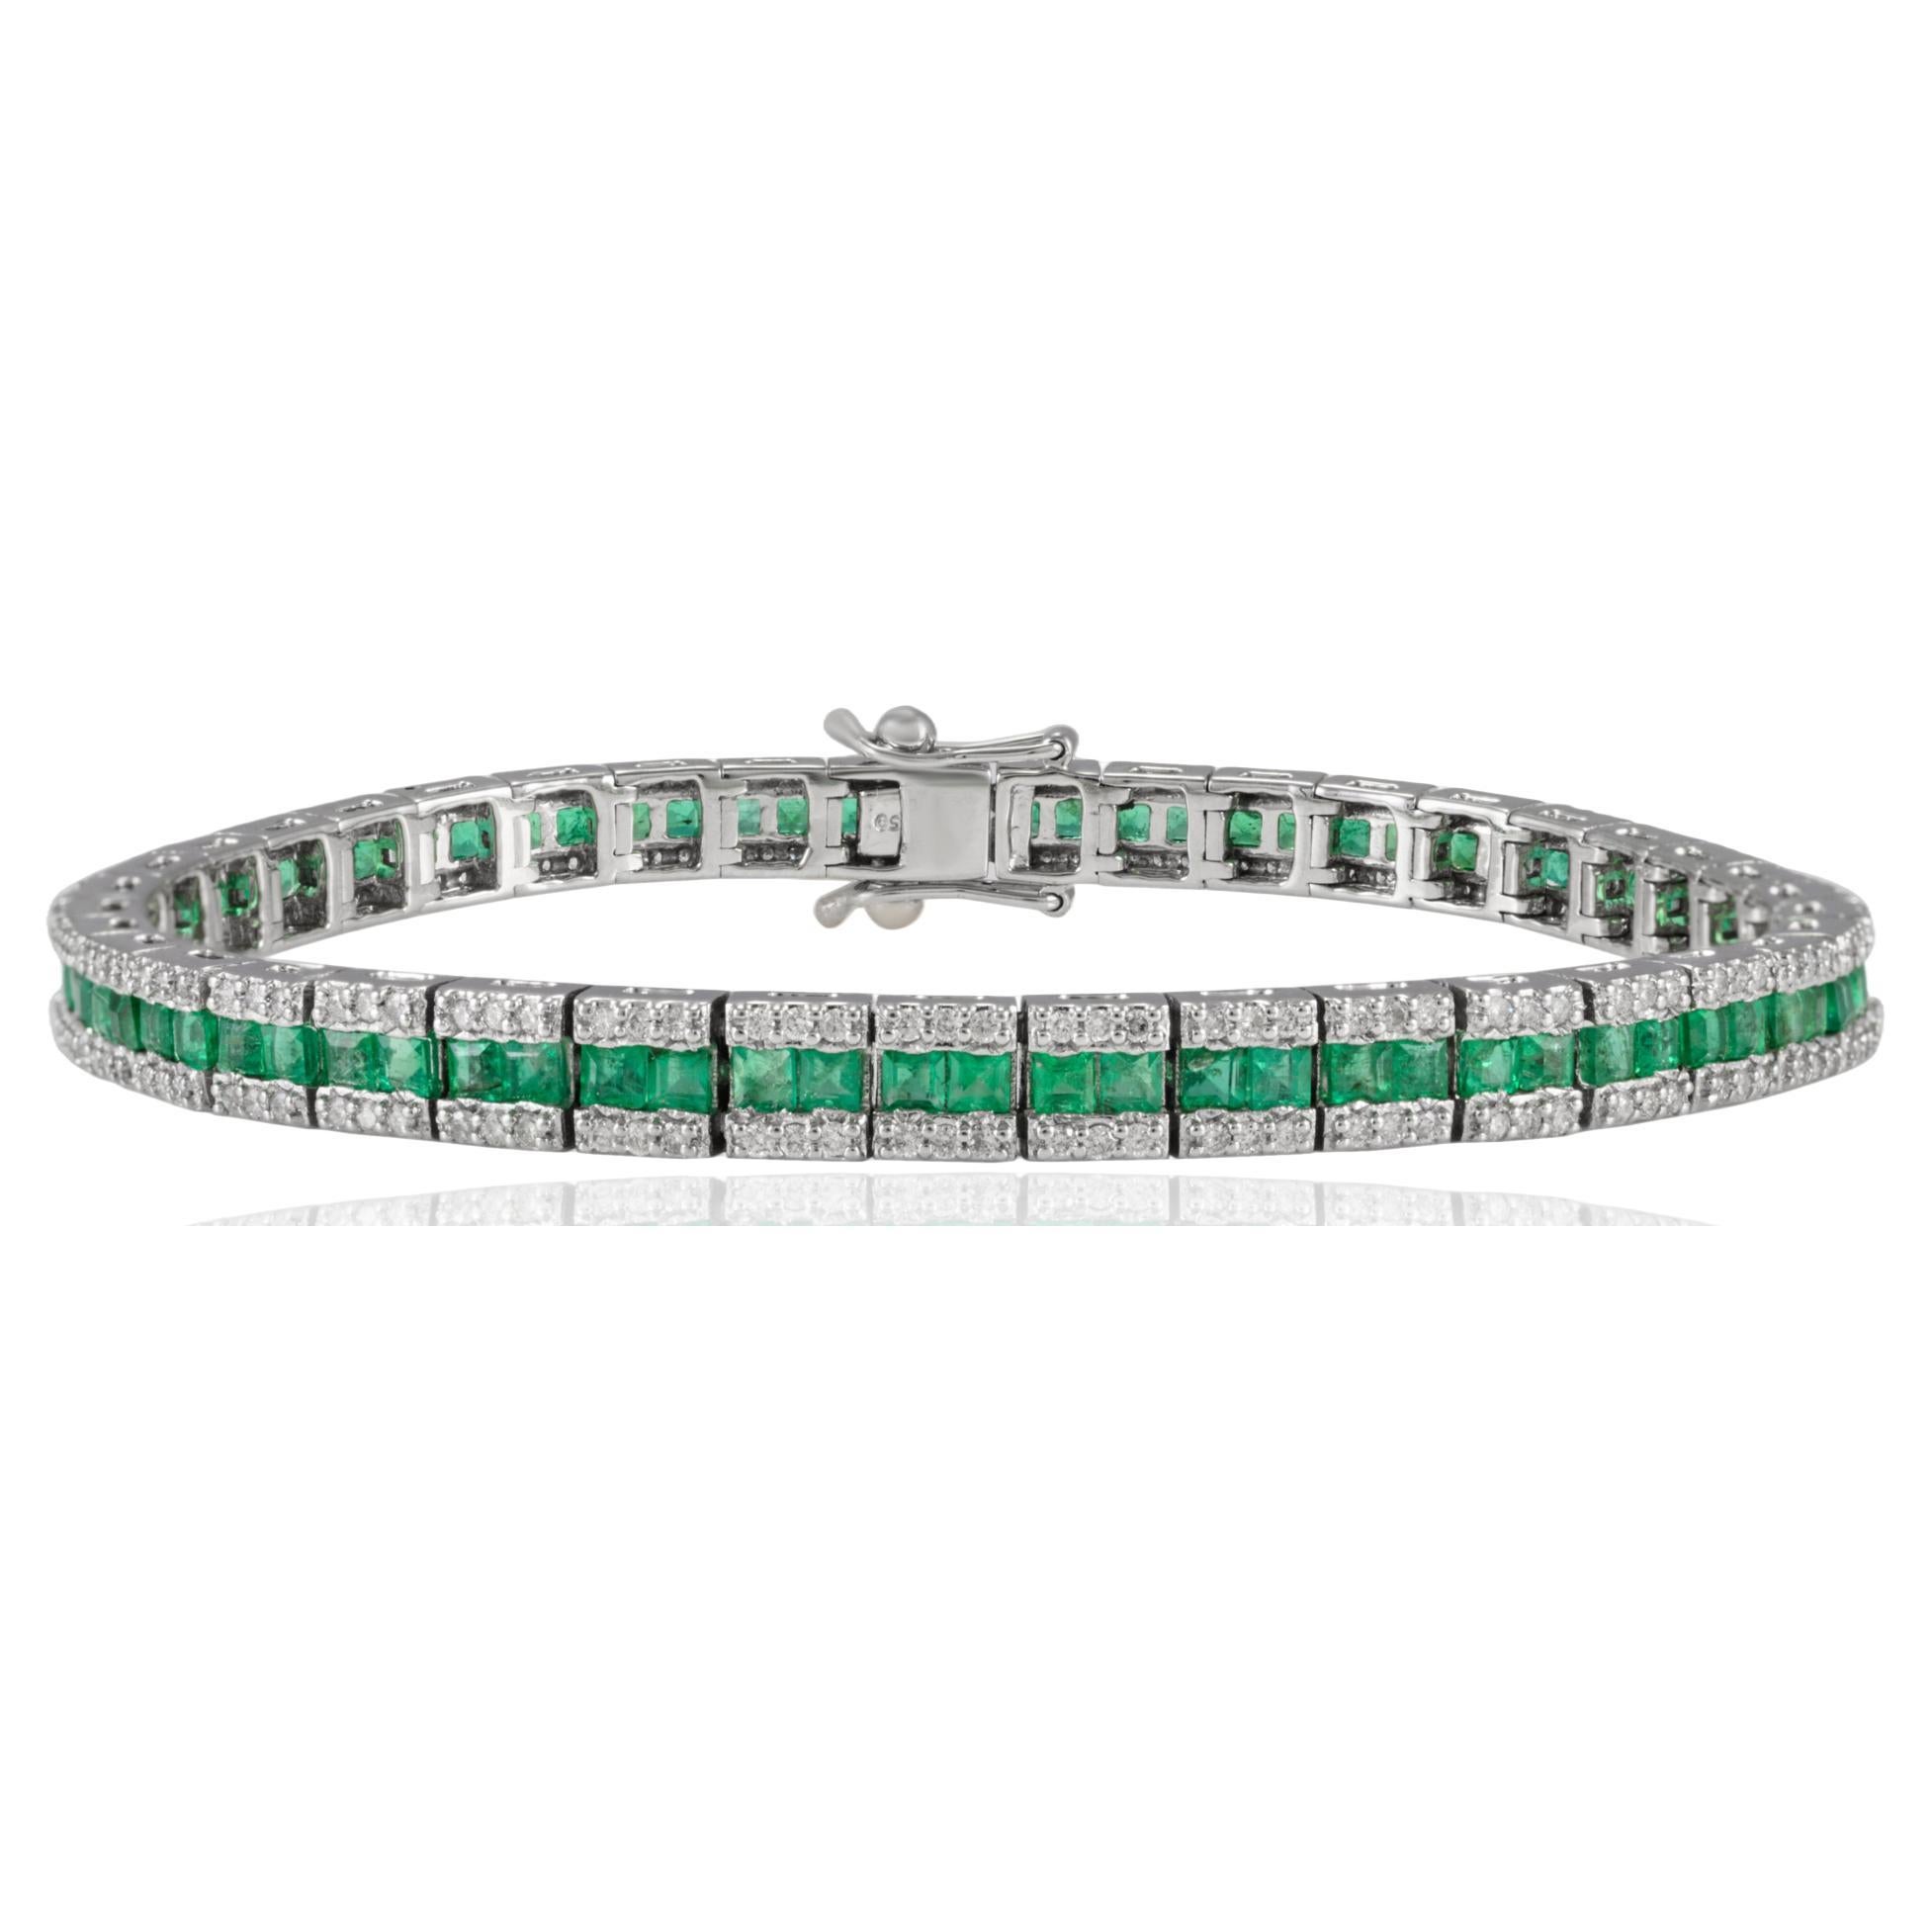 French Cut Certified Emerald Diamond Tennis Bracelet in 18k Solid White Gold For Sale